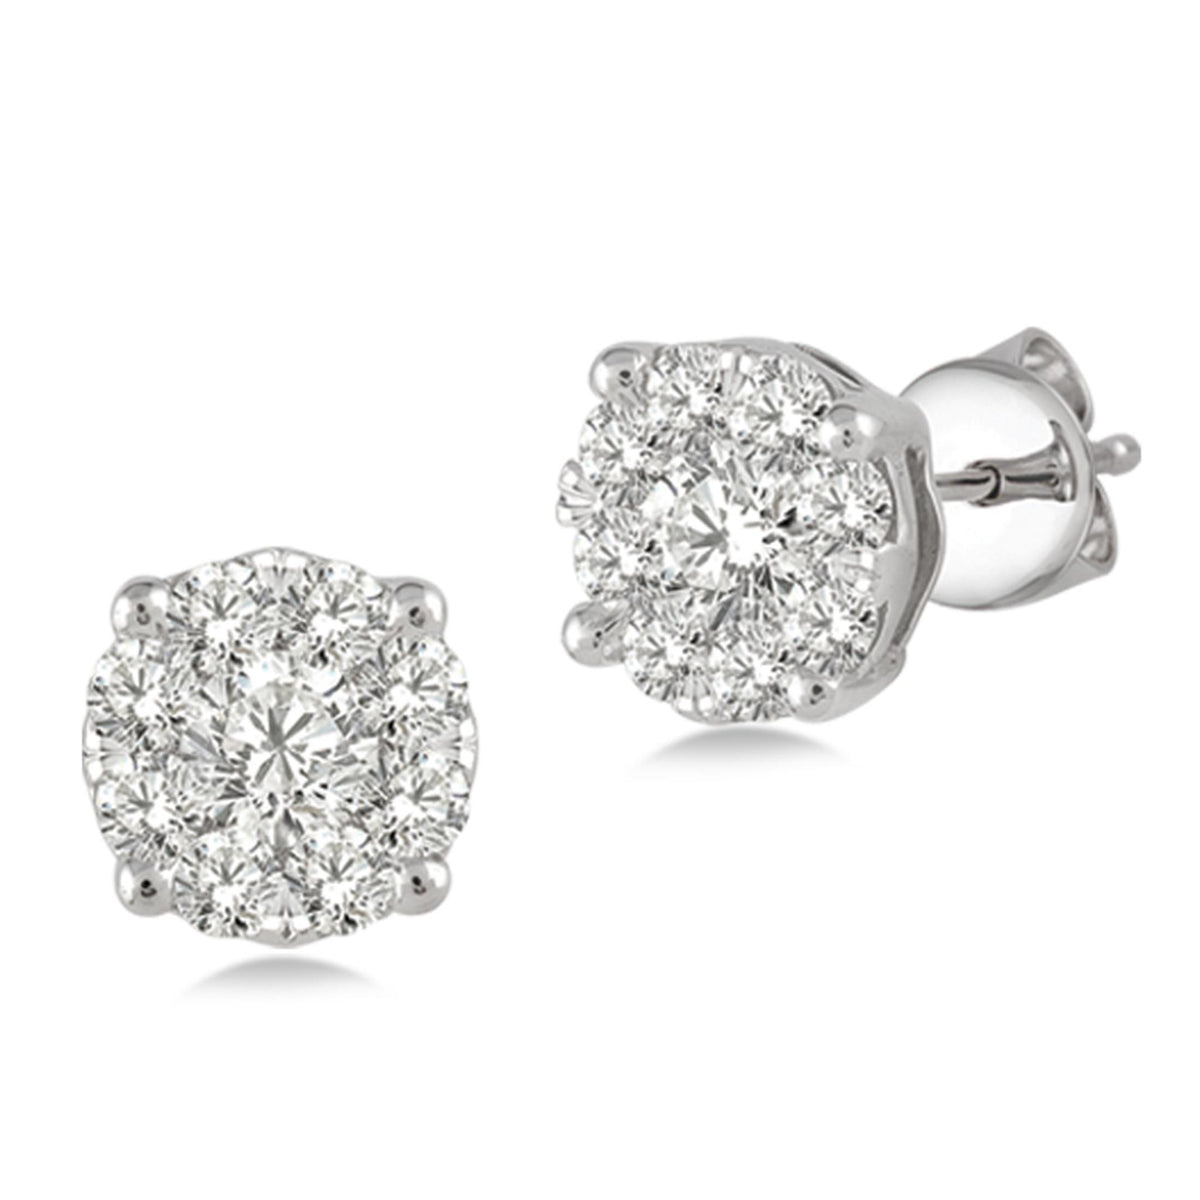 Lovebright 14Kt White Gold Stud Earrings With .75cttw Natural Diamonds